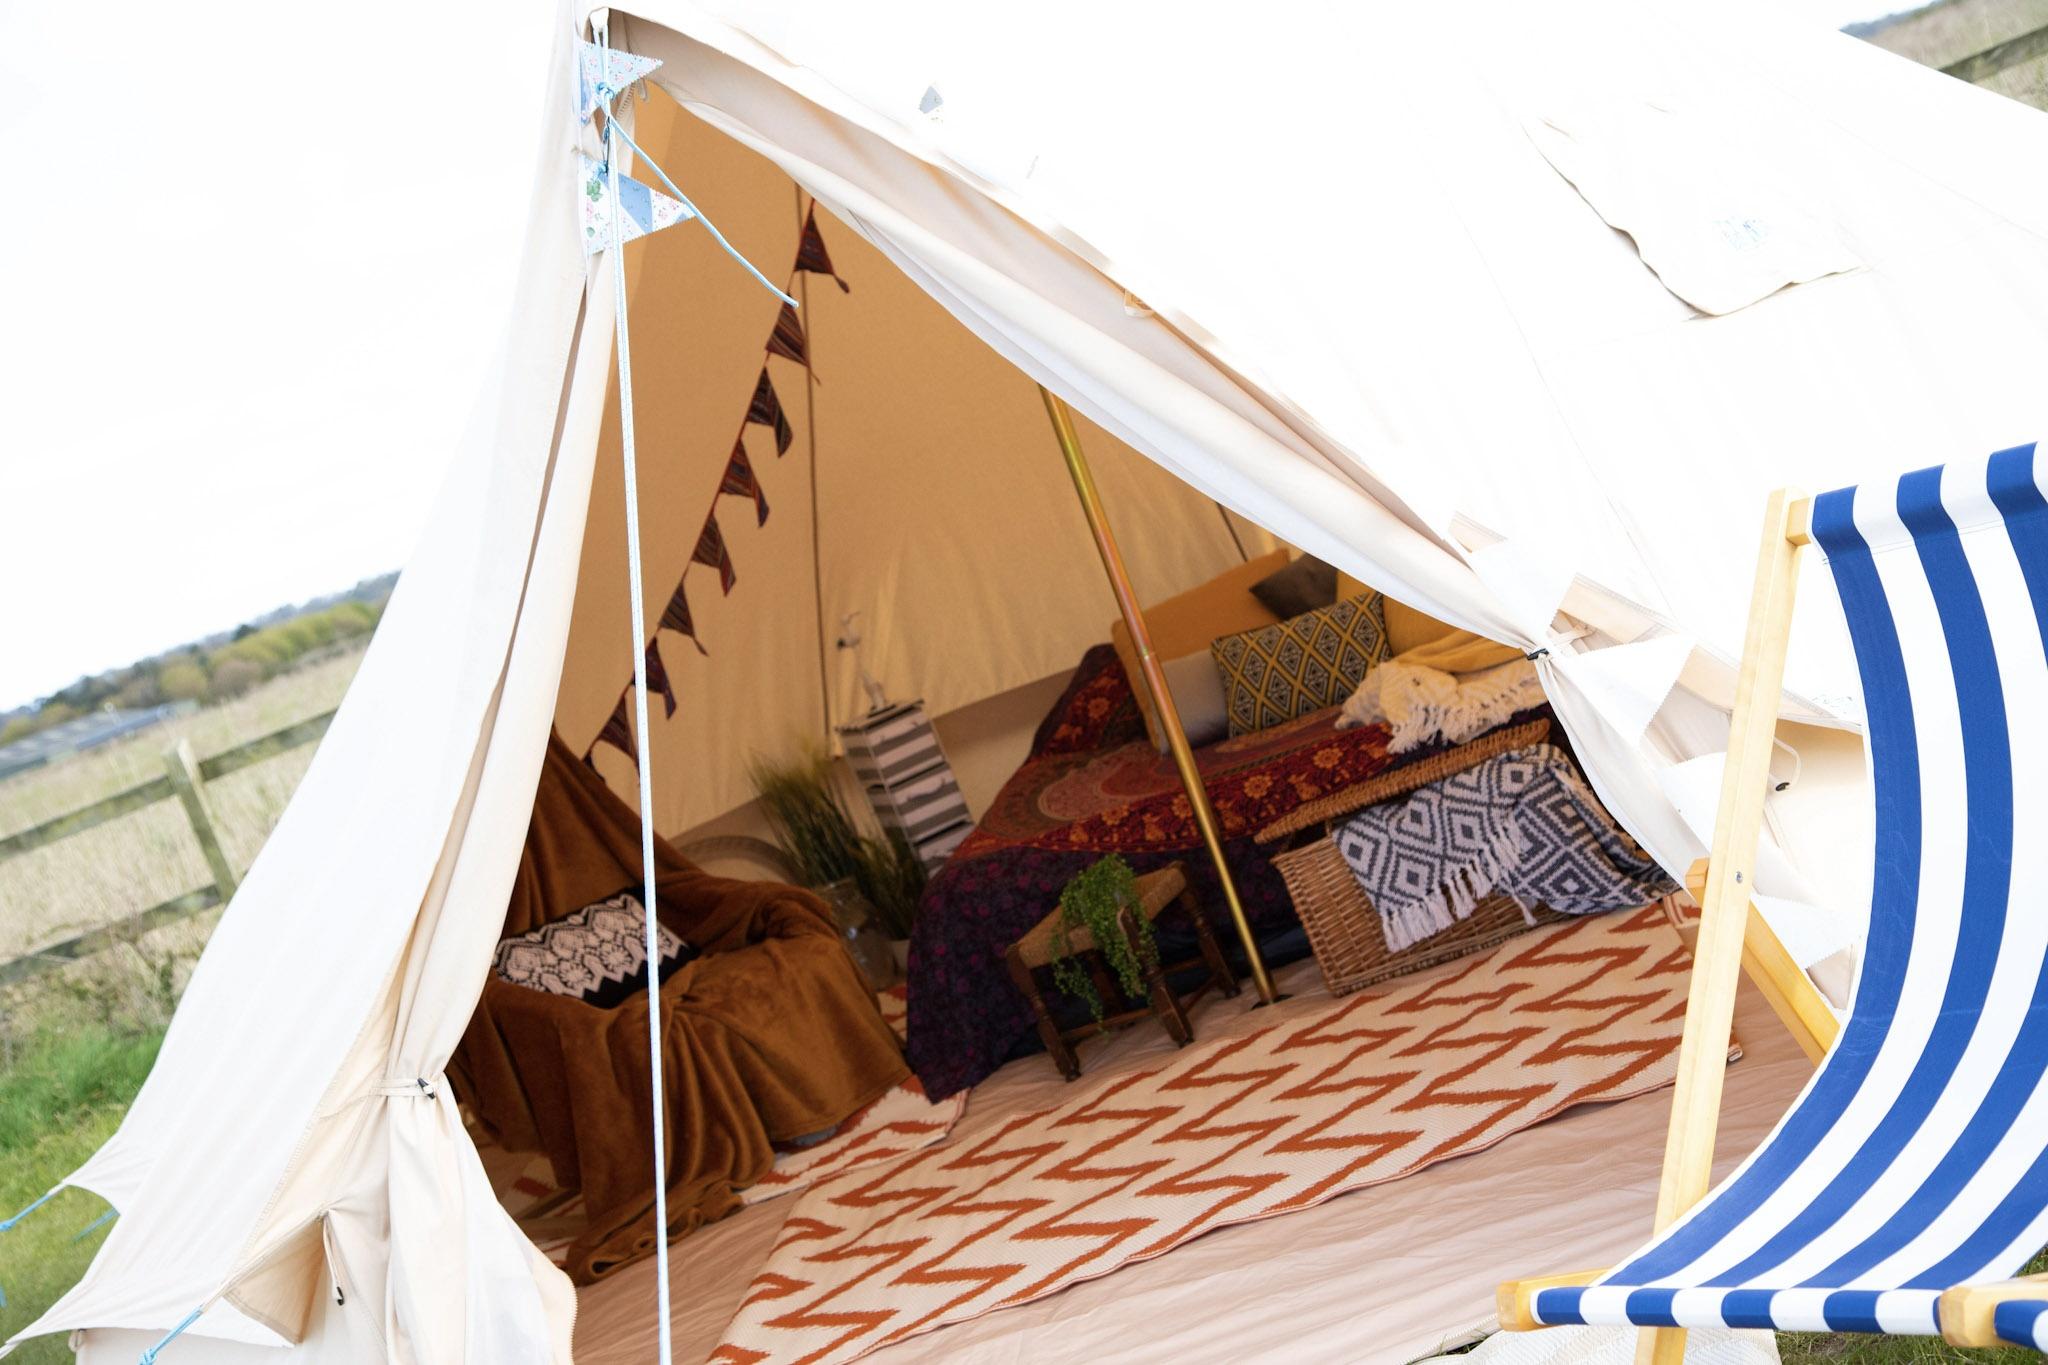 Holt Hollow Glamping Bell Tent